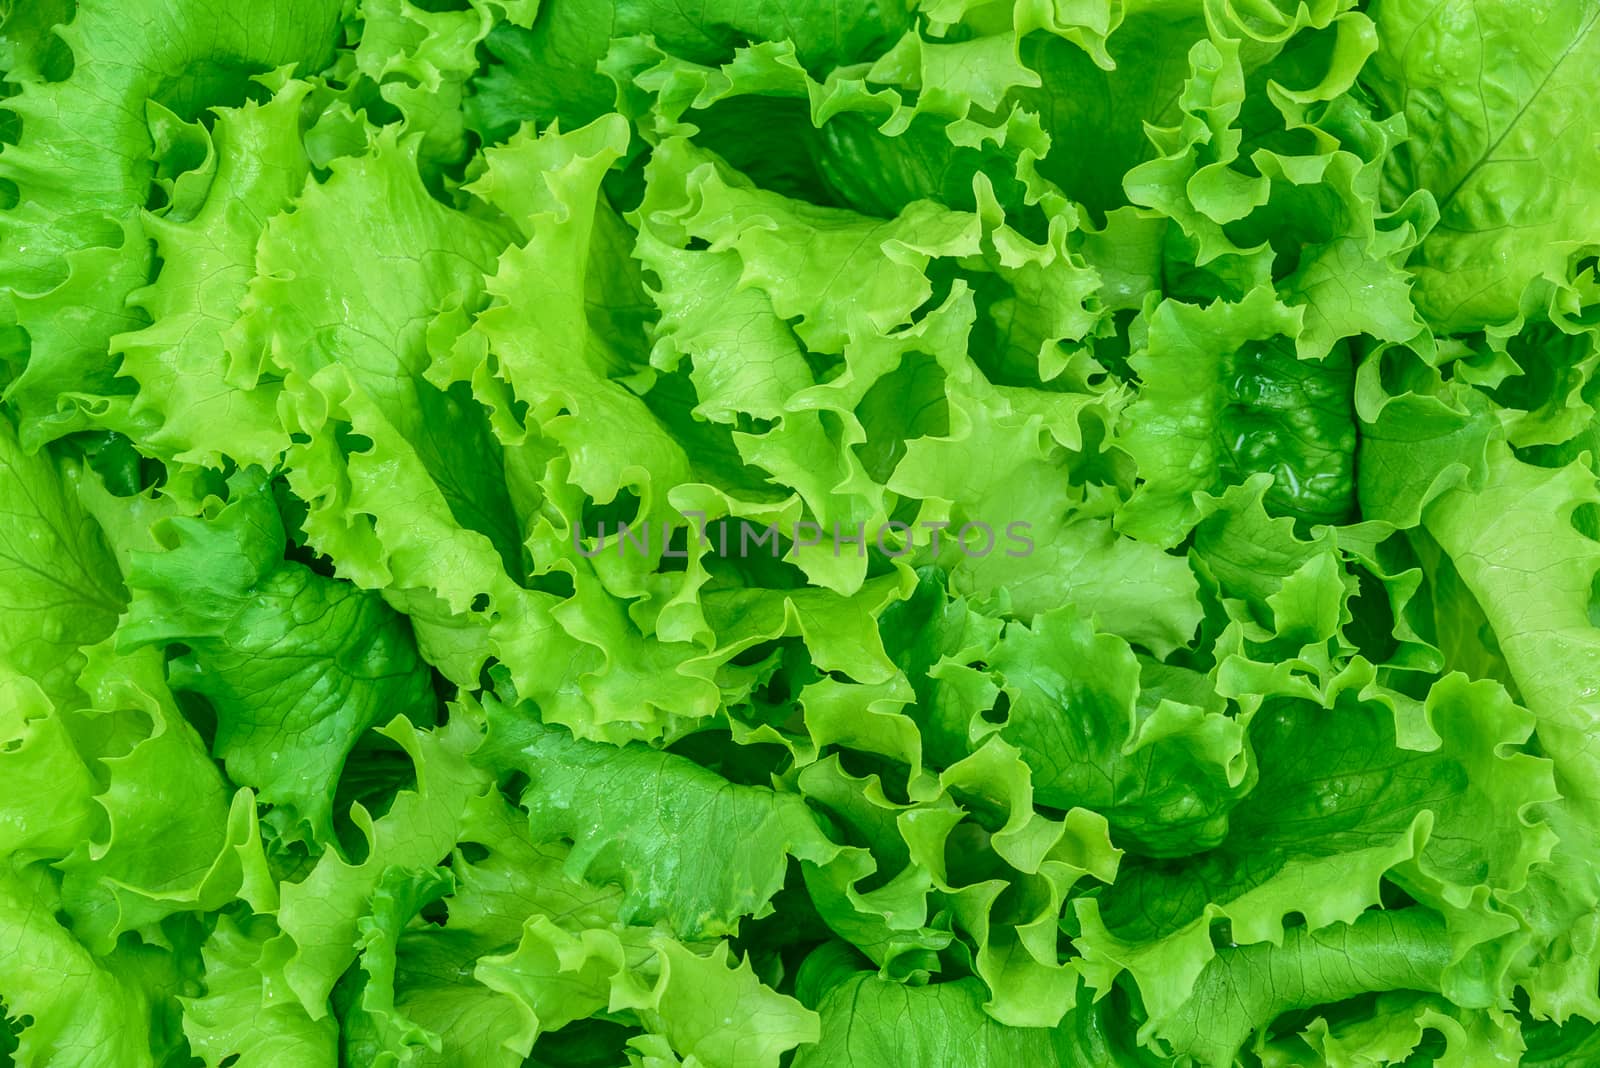 Fresh and wet green lettuce from organic farm as a texture background - high angel view.